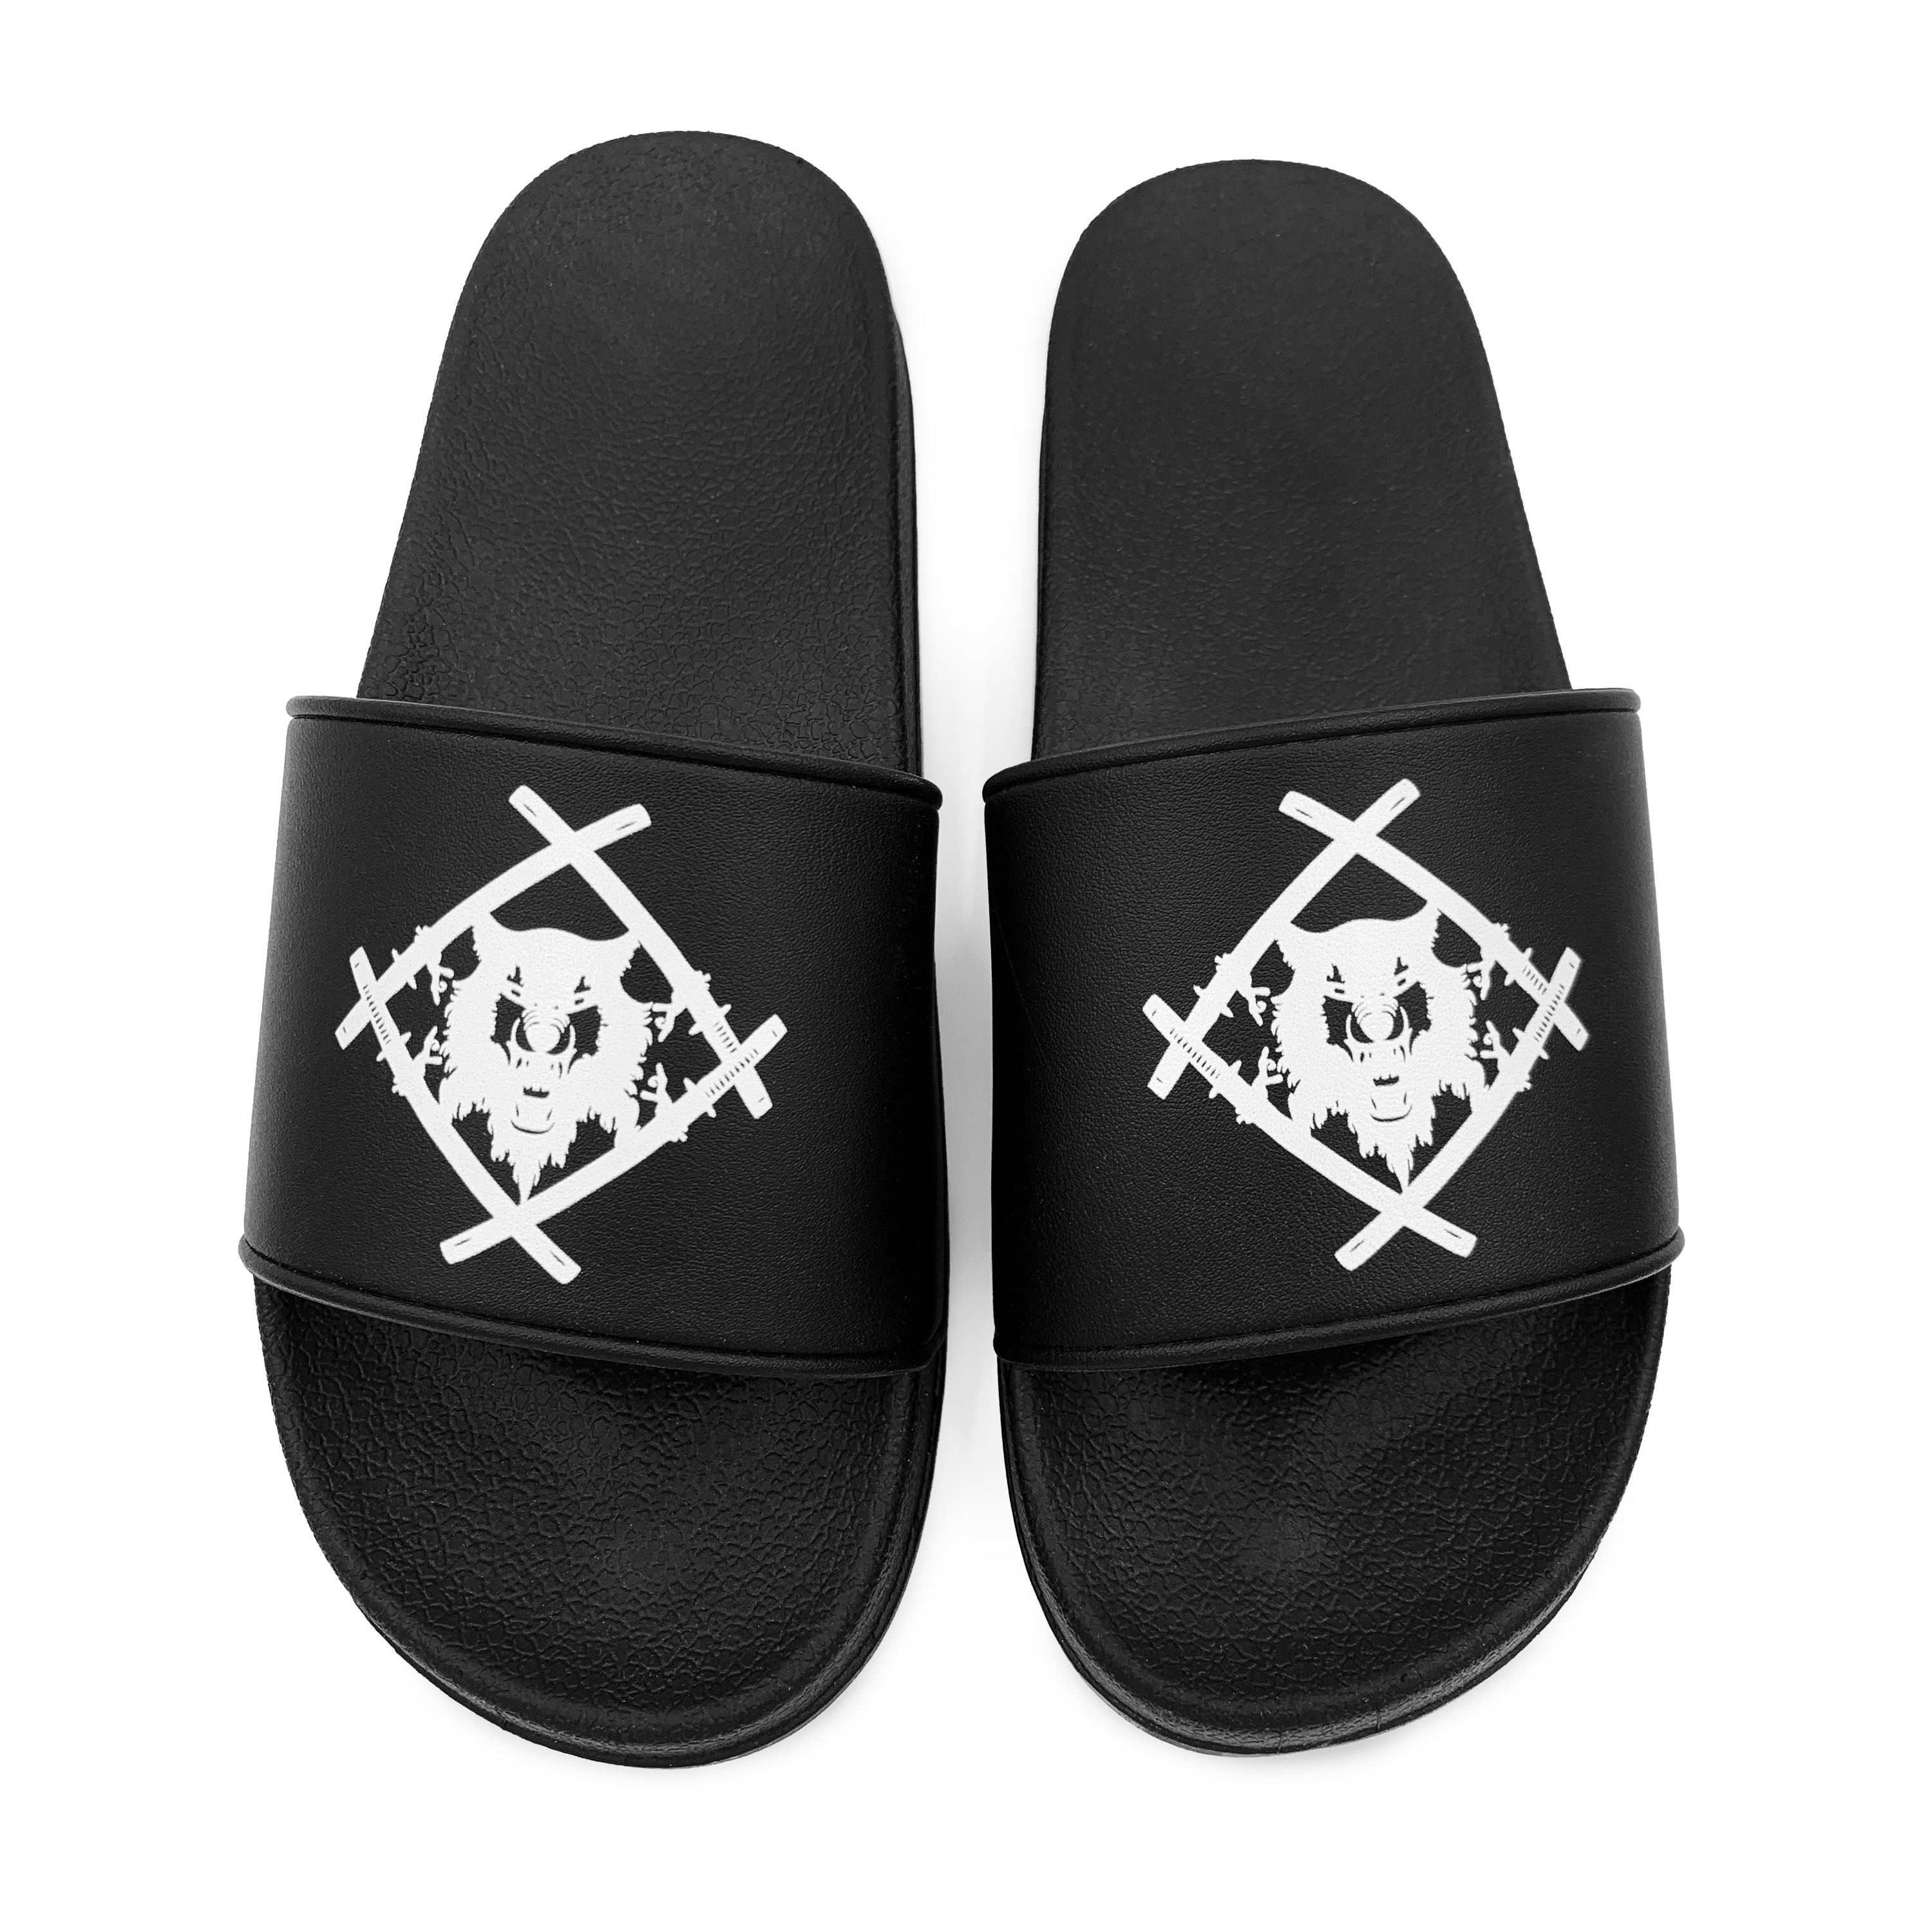 Official HS Slides – MerchLabs